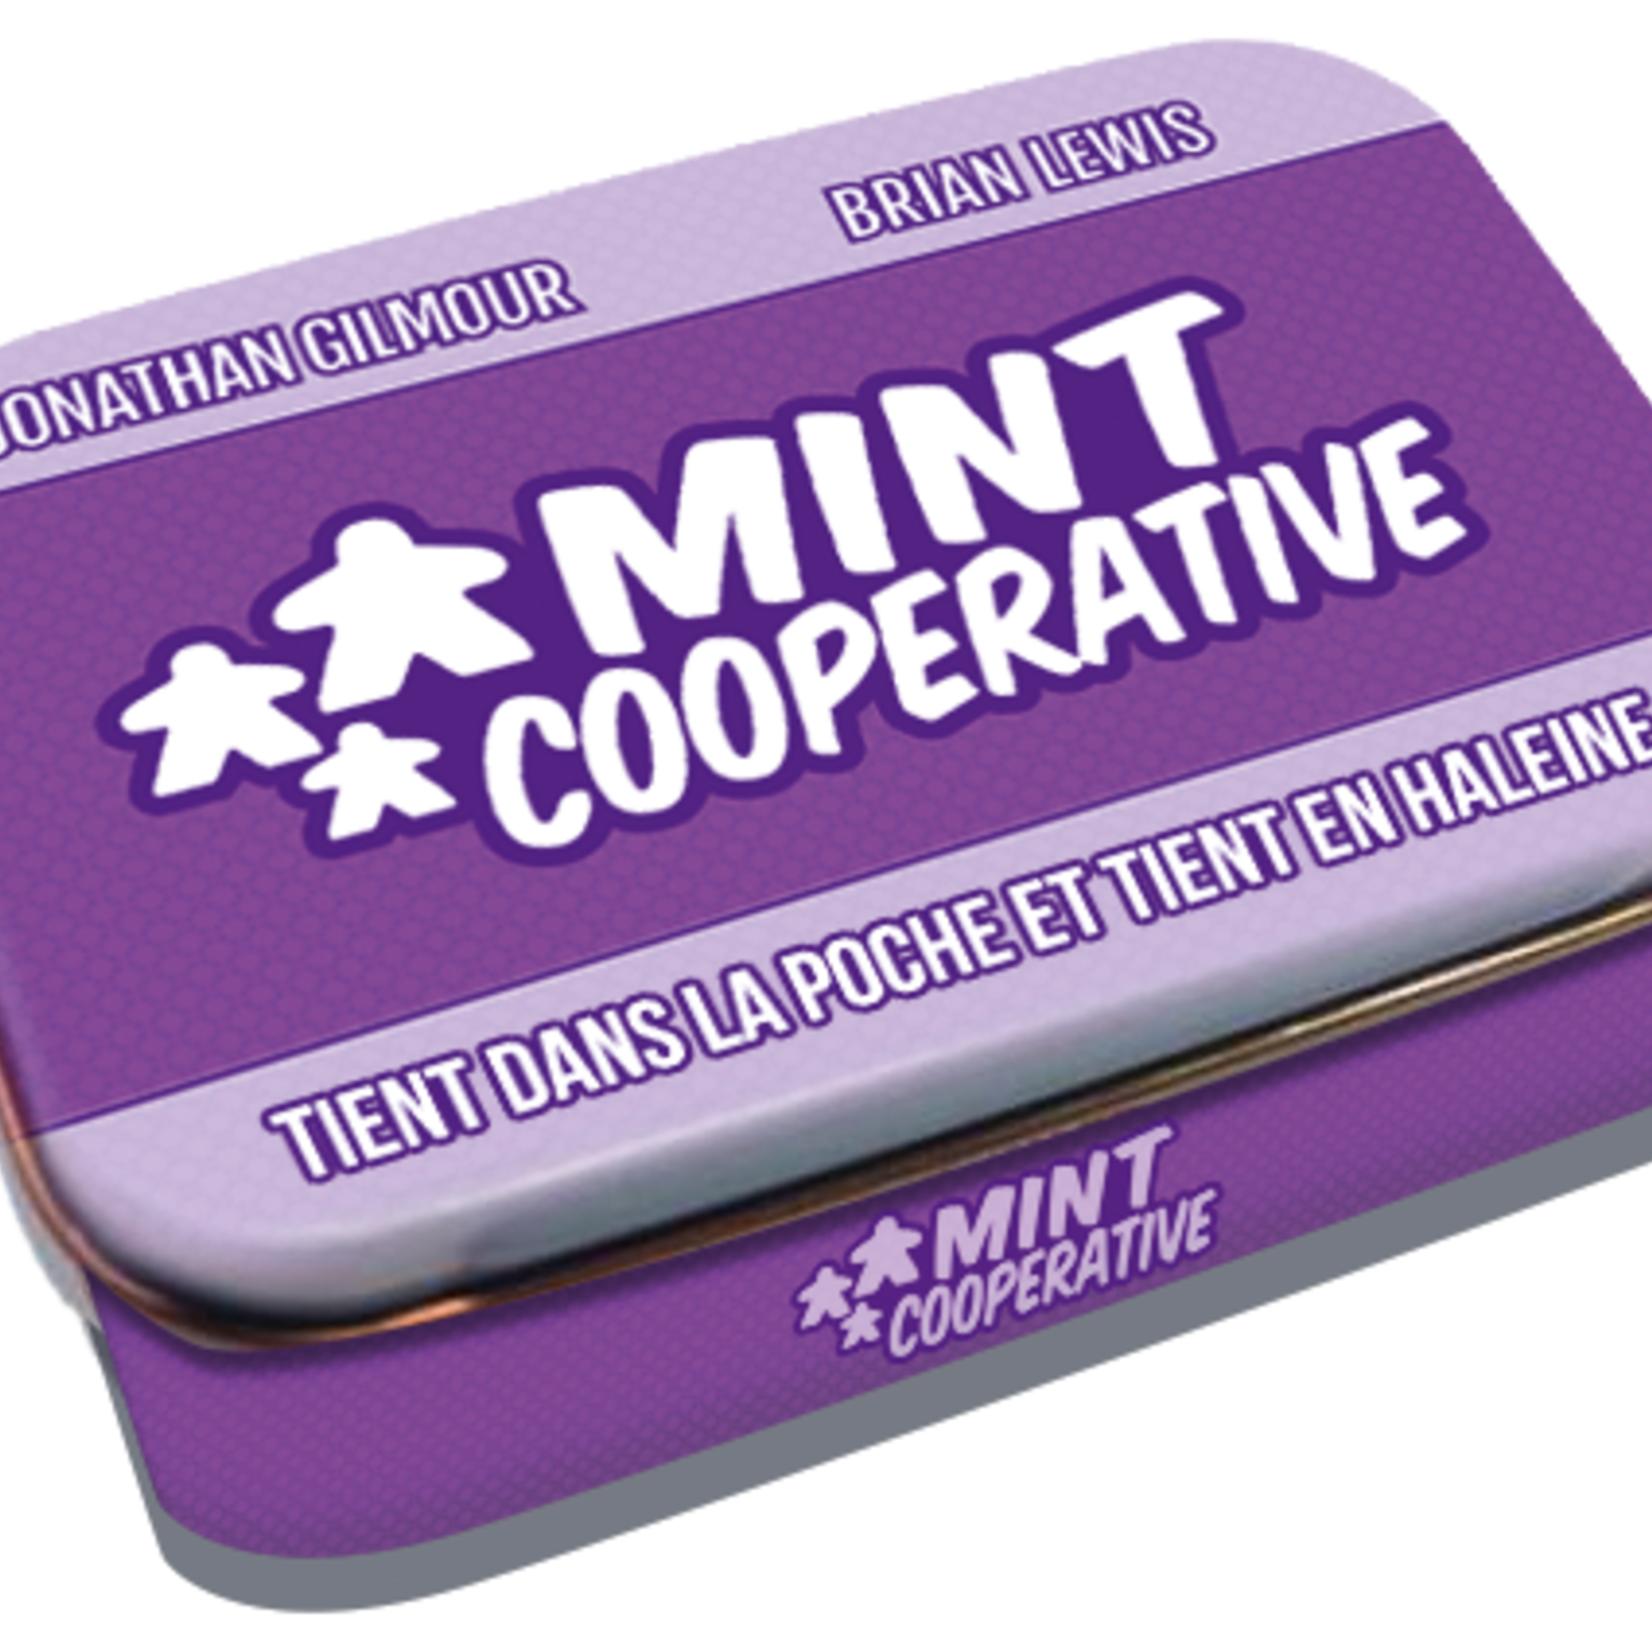 Lucky Duck Games Mint Cooperative